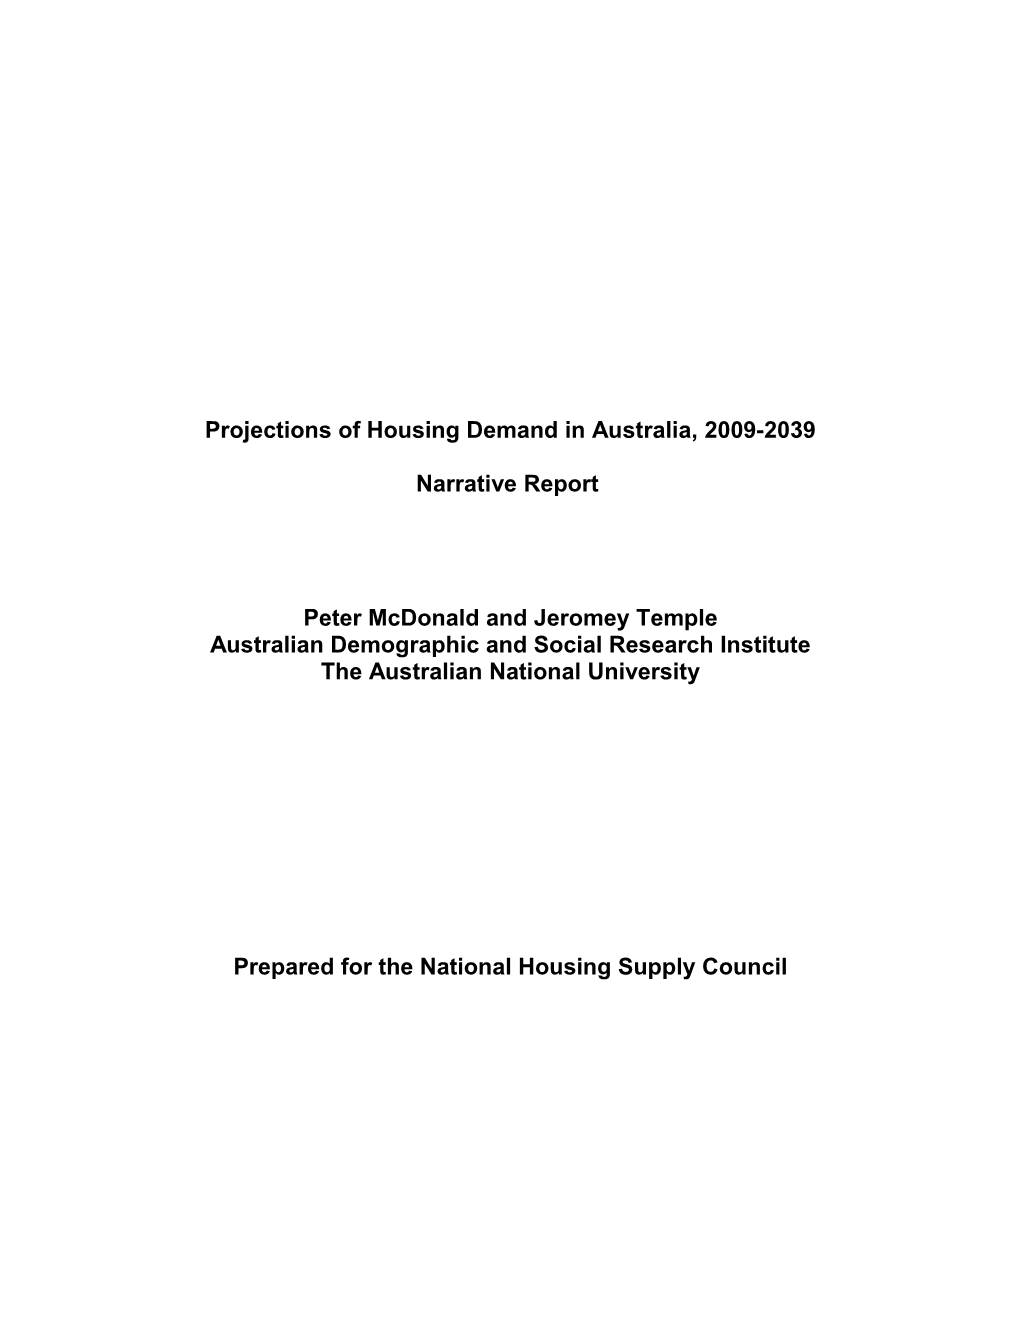 Projections of Housing Demand in New South Wales, 2006-2021